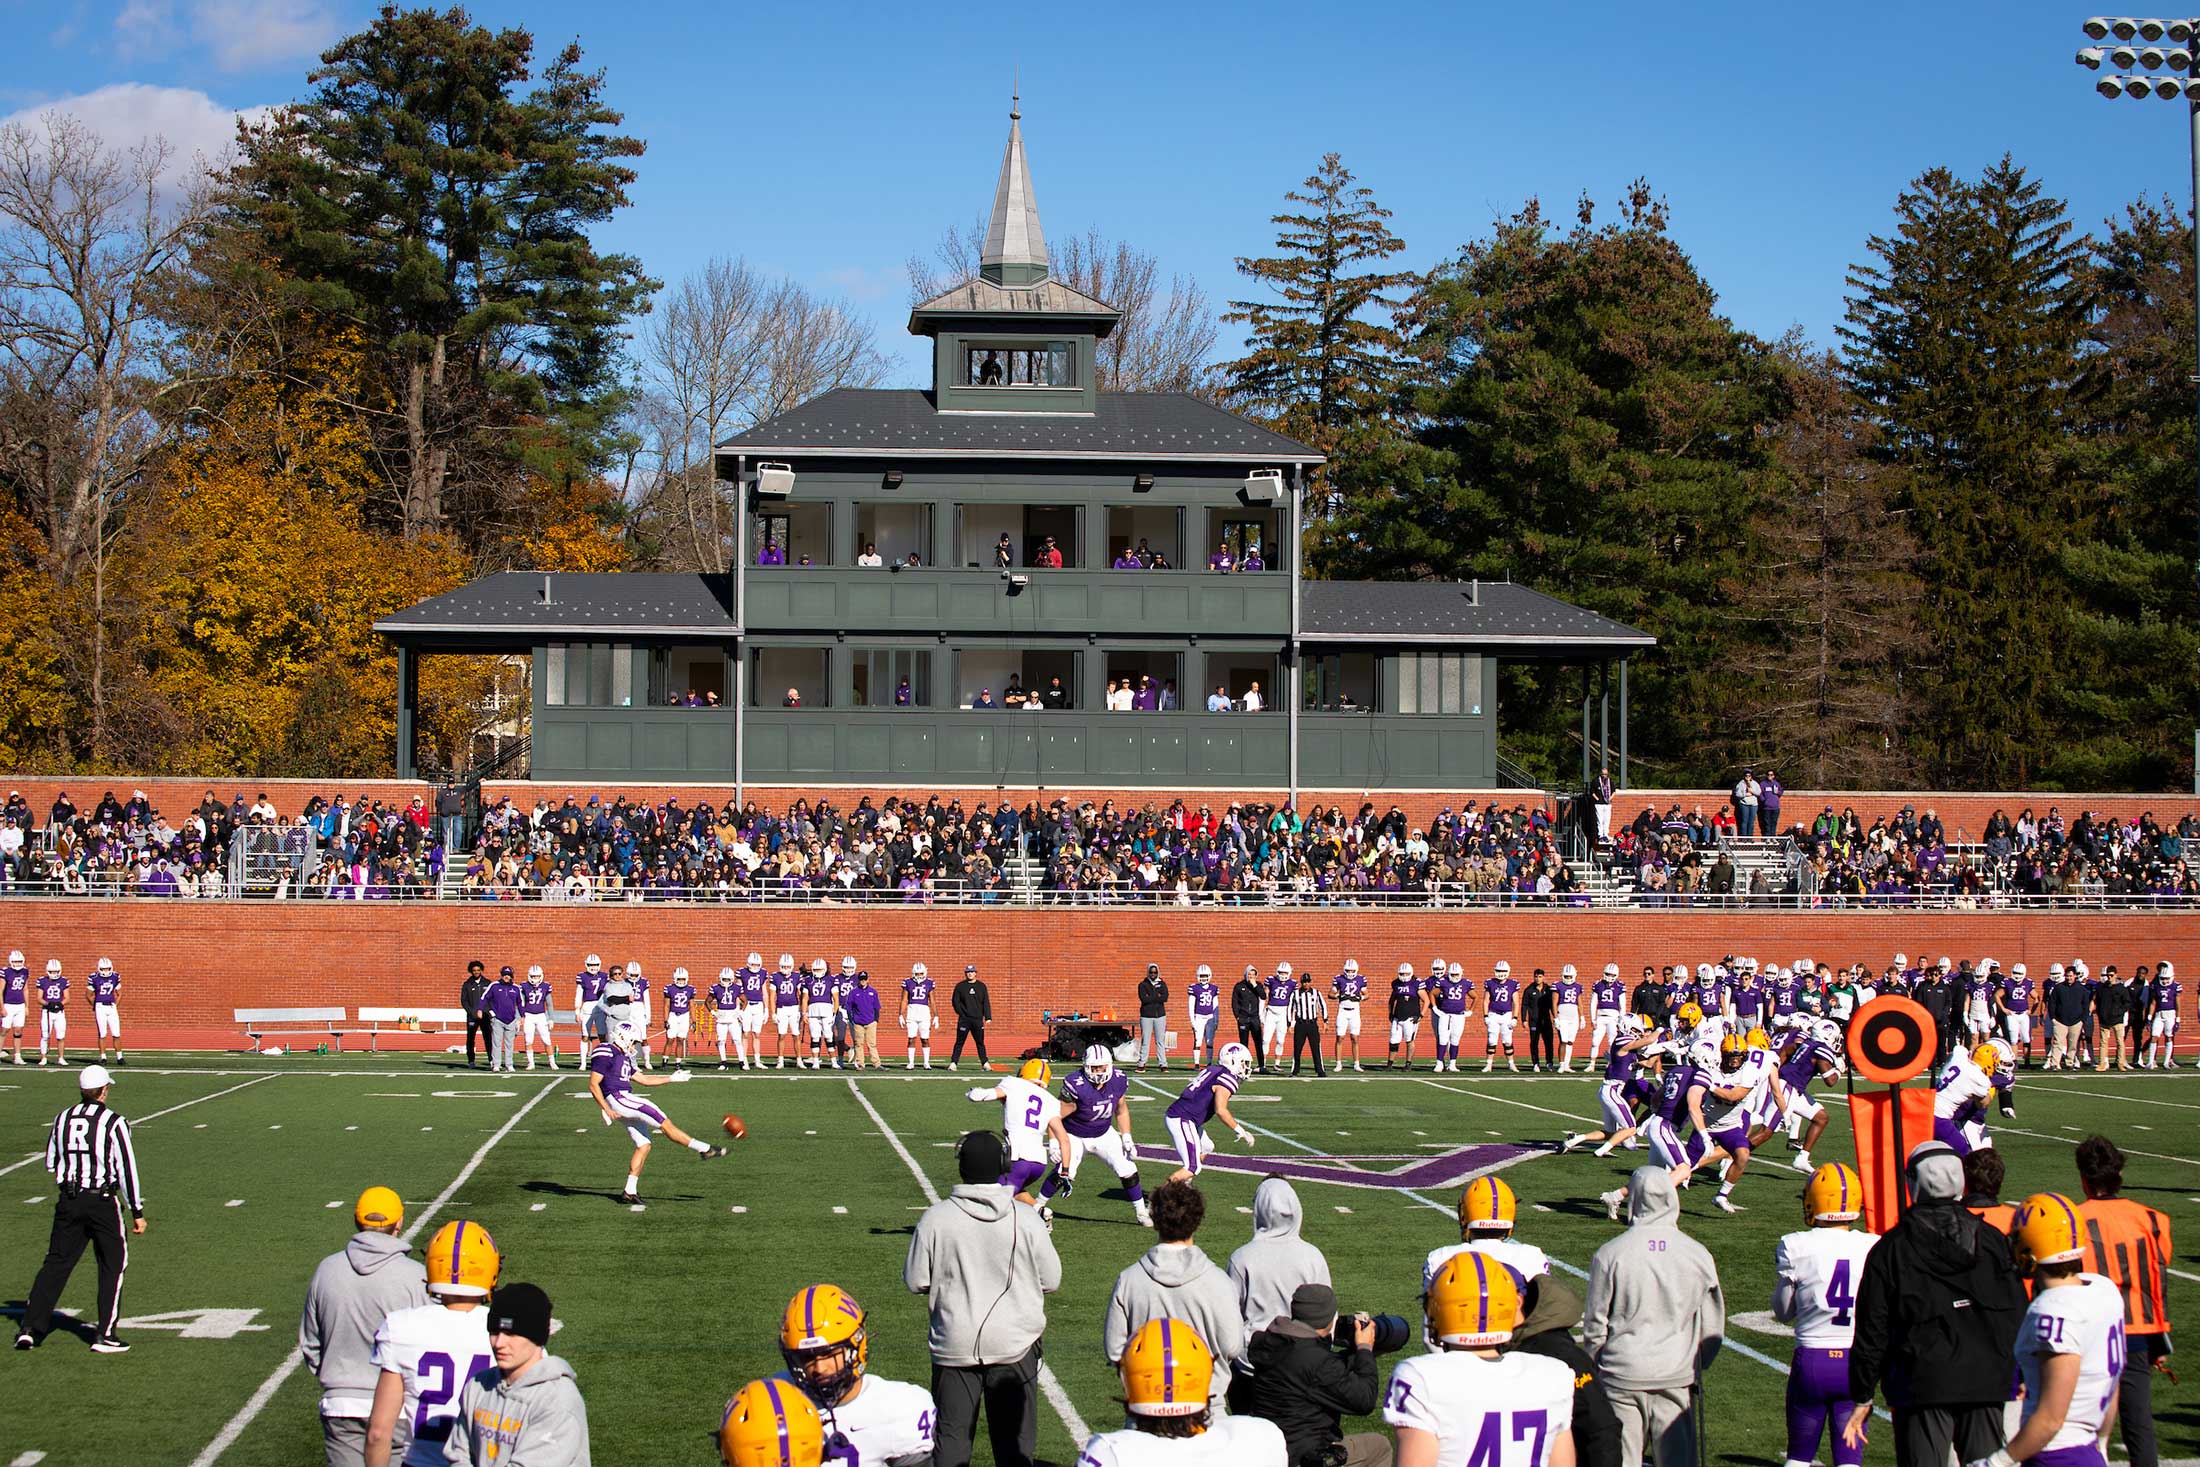 Amherst College vs. Williams College football game.